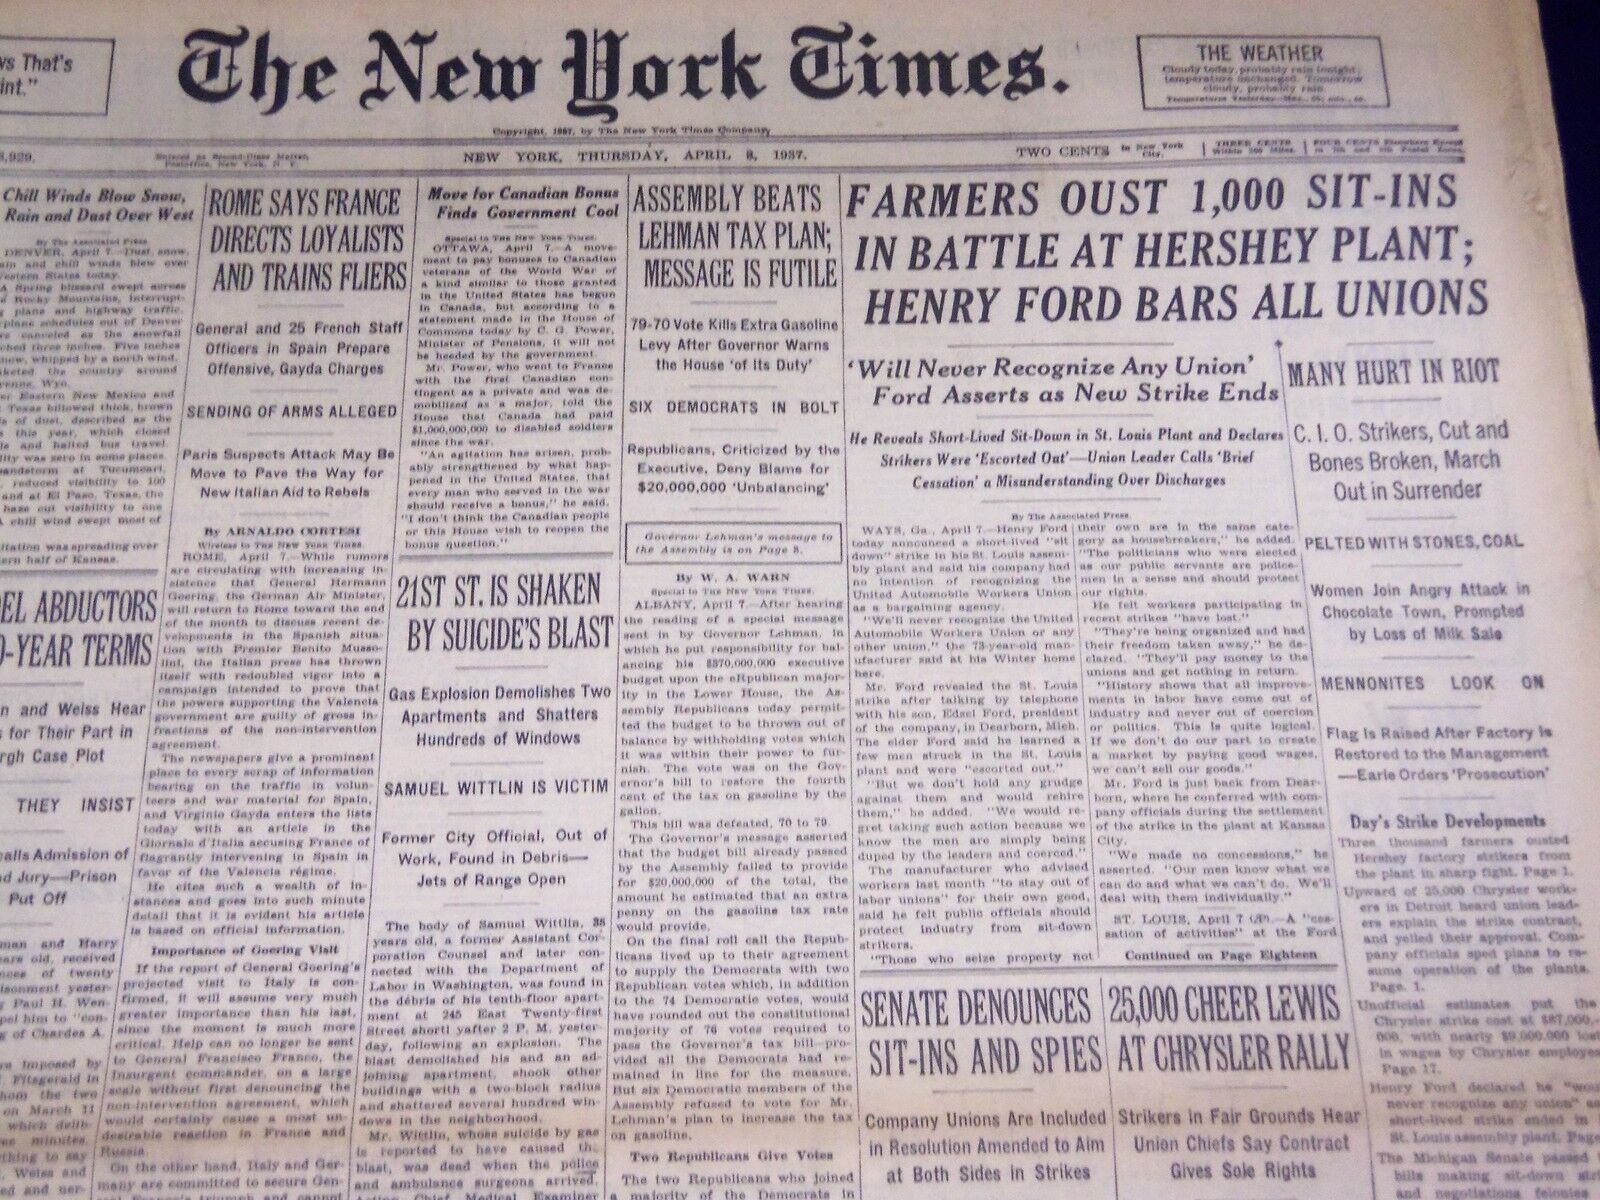 1937 APRIL 8 NEW YORK TIMES - HENRY FORD BARS ALL UNIONS - NT 3095